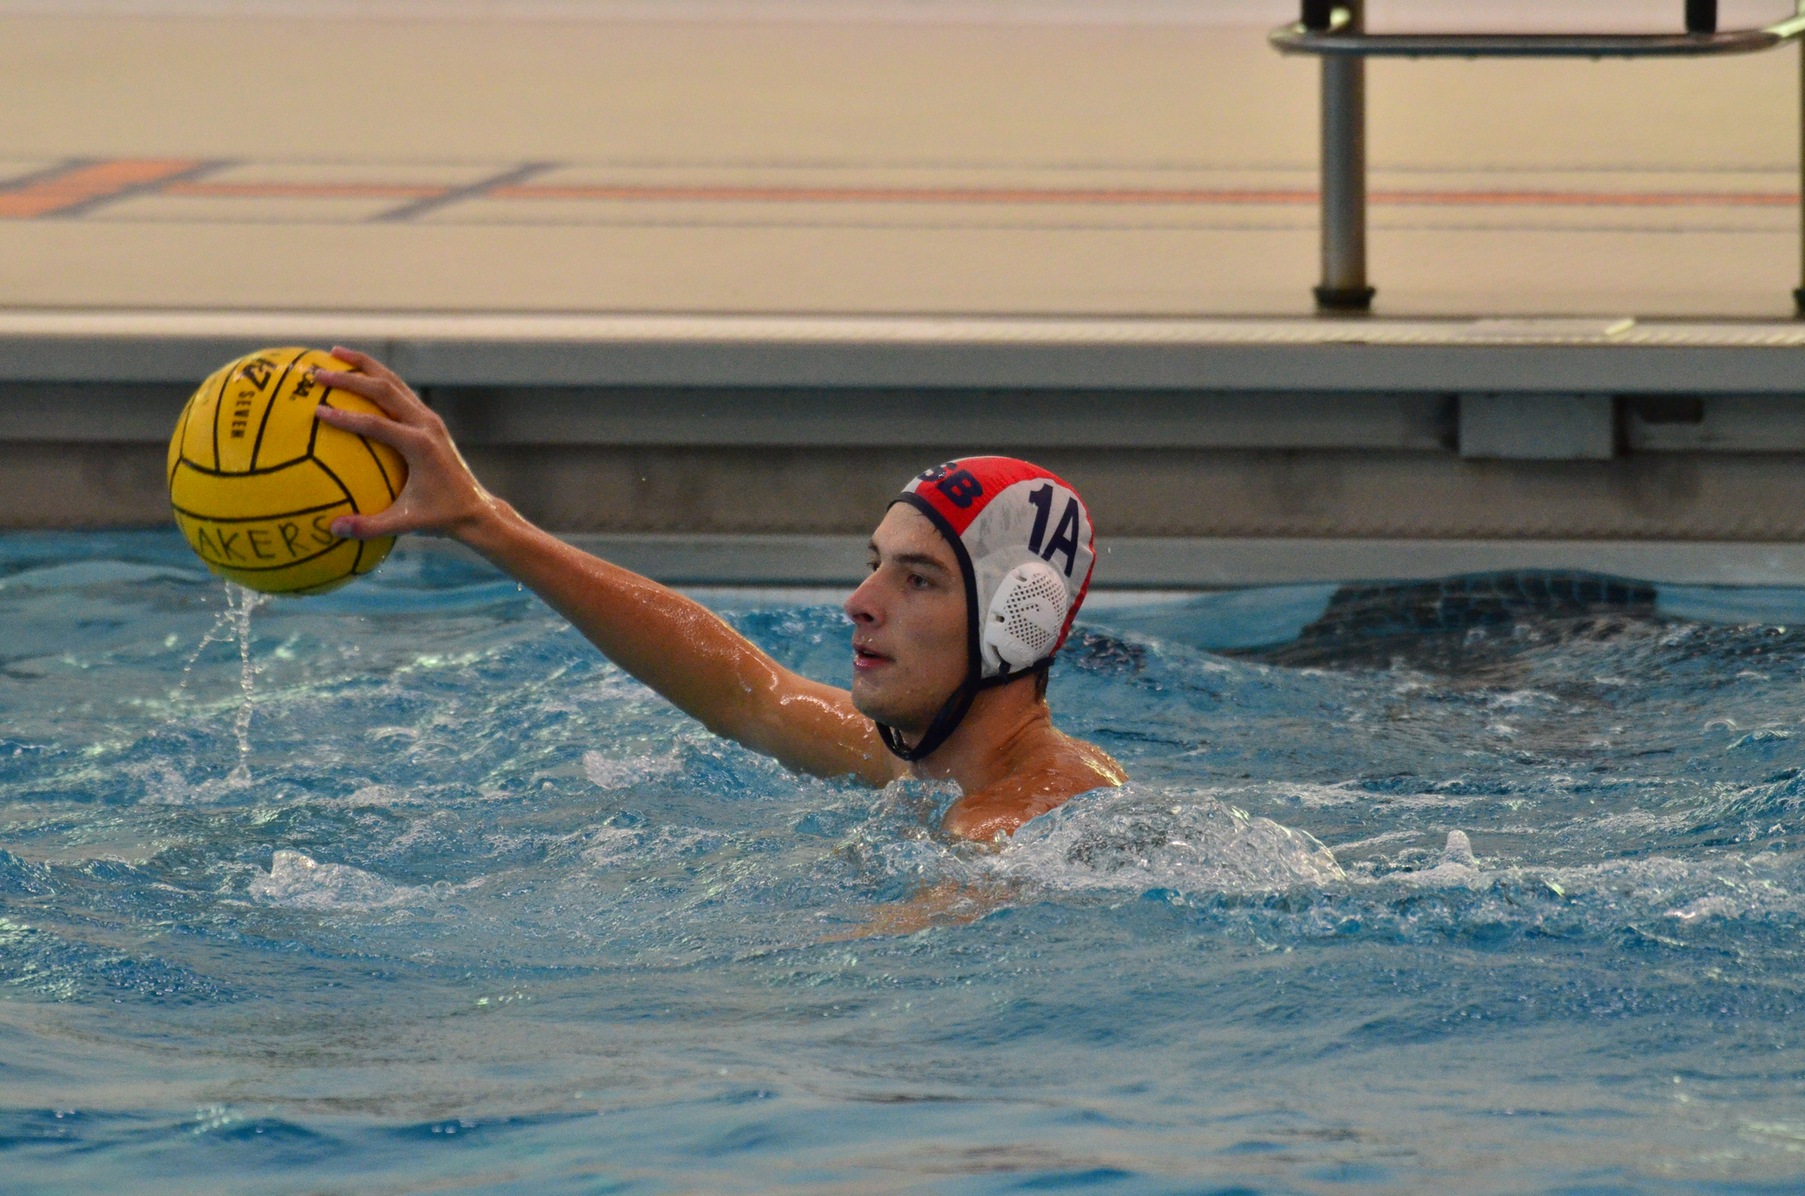 Men's Water Polo Drop a Nail-Biter to McKendree